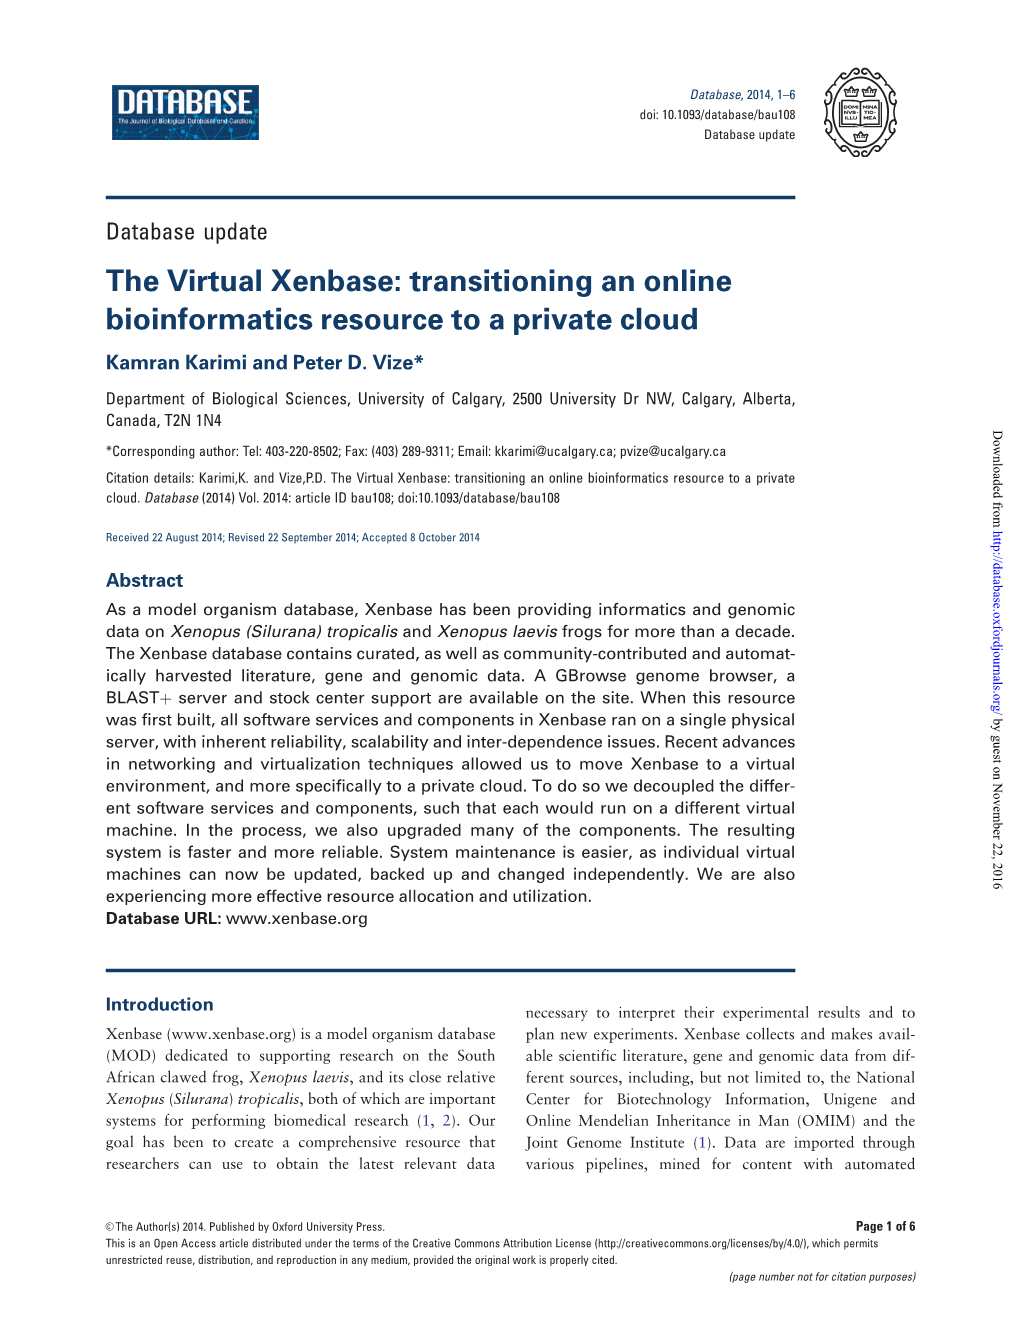 The Virtual Xenbase: Transitioning an Online Bioinformatics Resource to a Private Cloud Kamran Karimi and Peter D